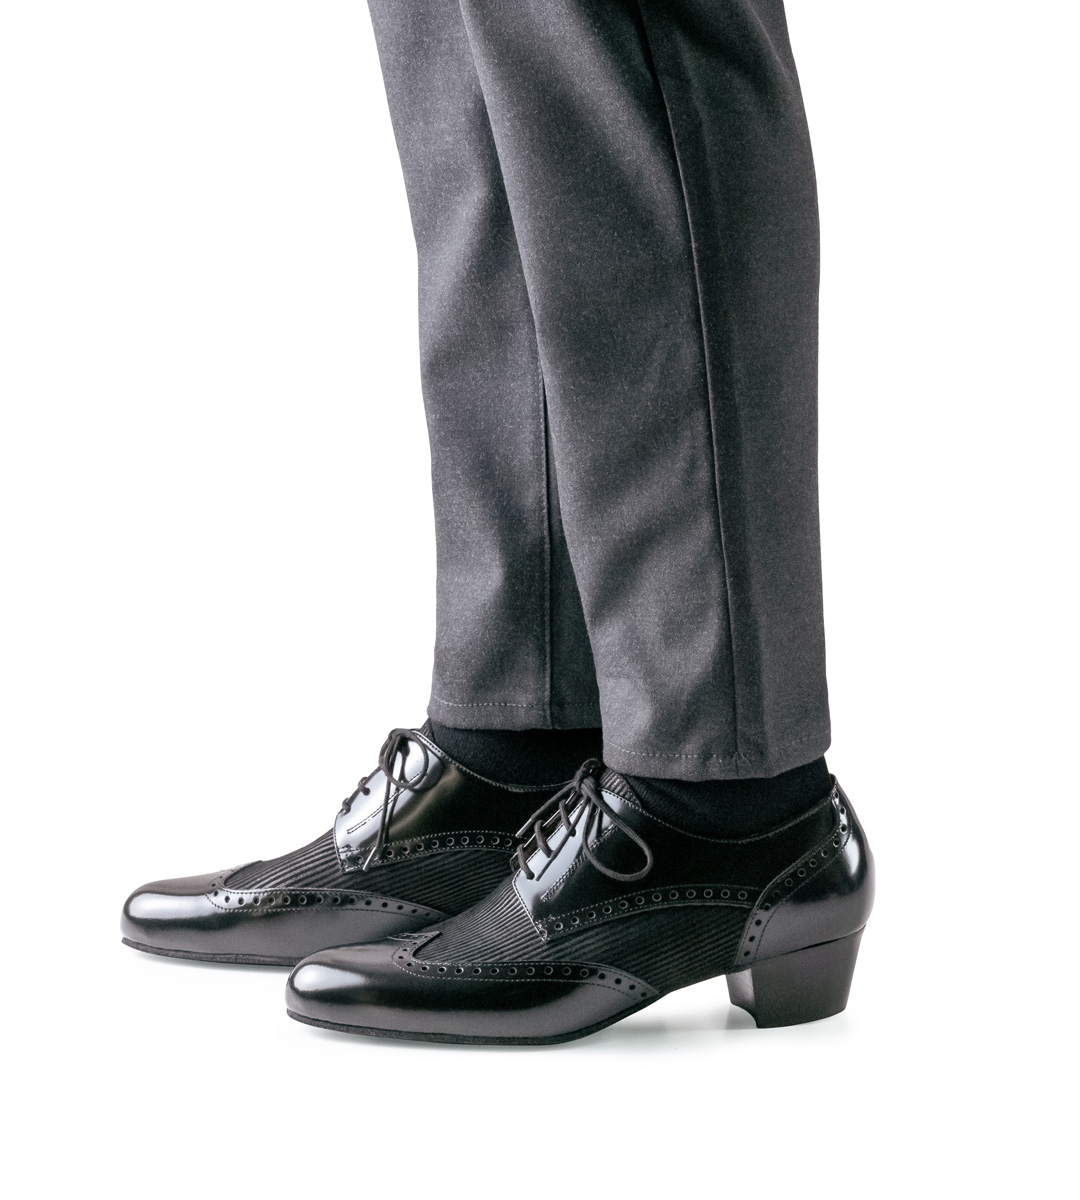 Side view of the 4 cm high Latin men's dance shoe in combination with grey trousers